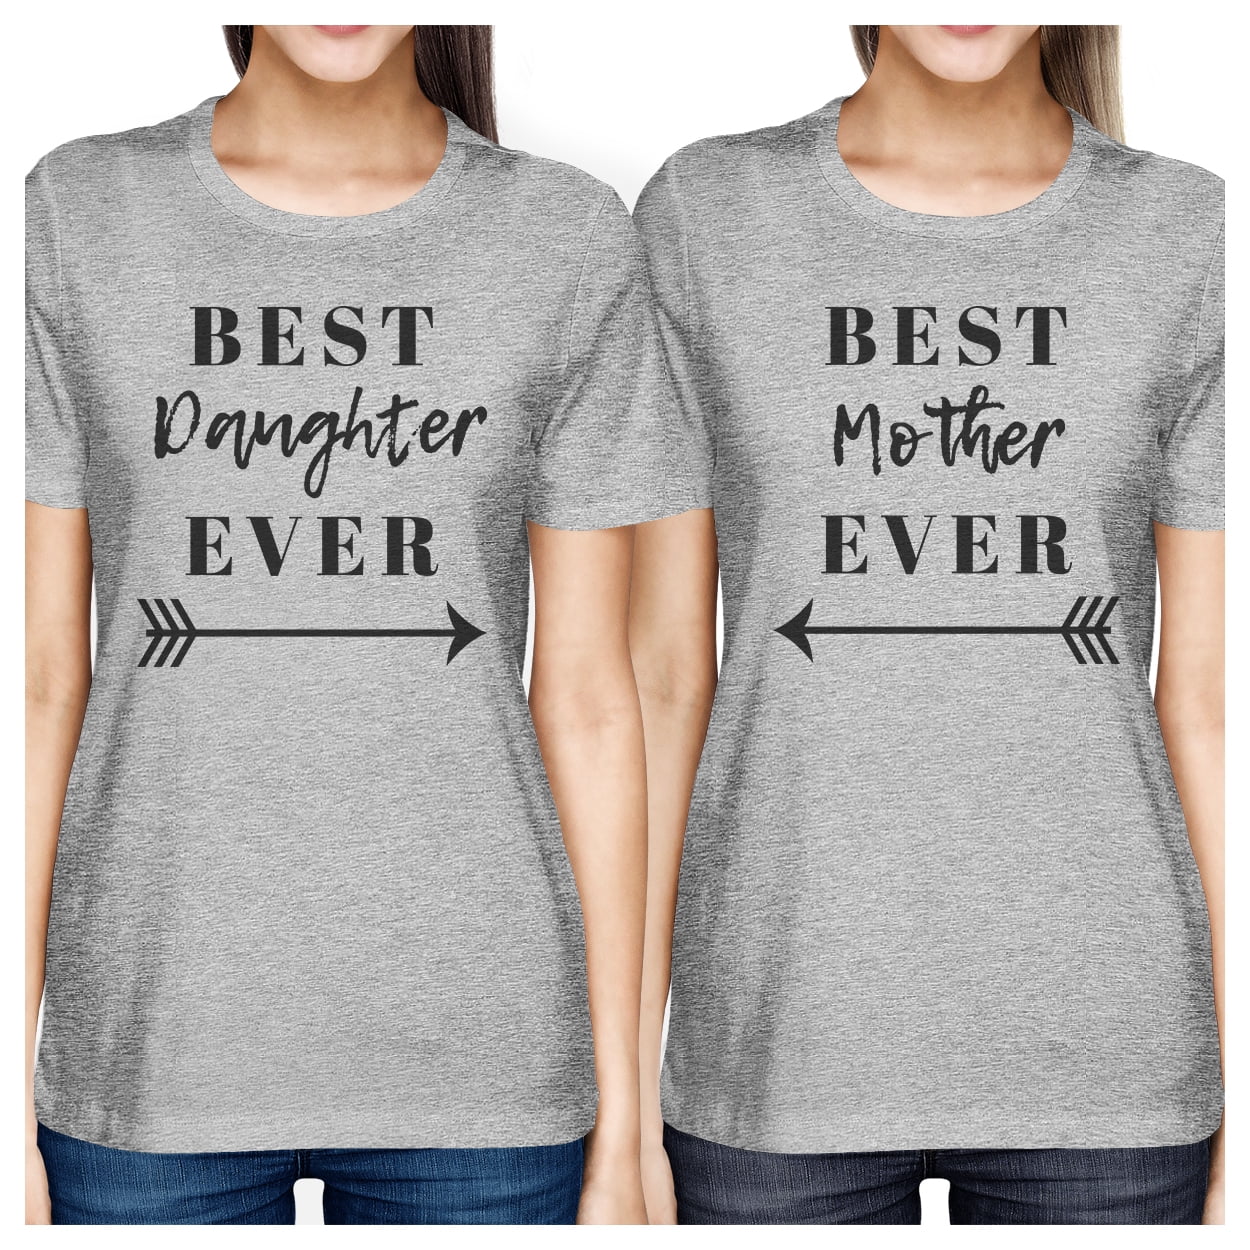 Details about   Best Daughter & Mother Ever Gray Graphic Tops For Mom And Daughter 